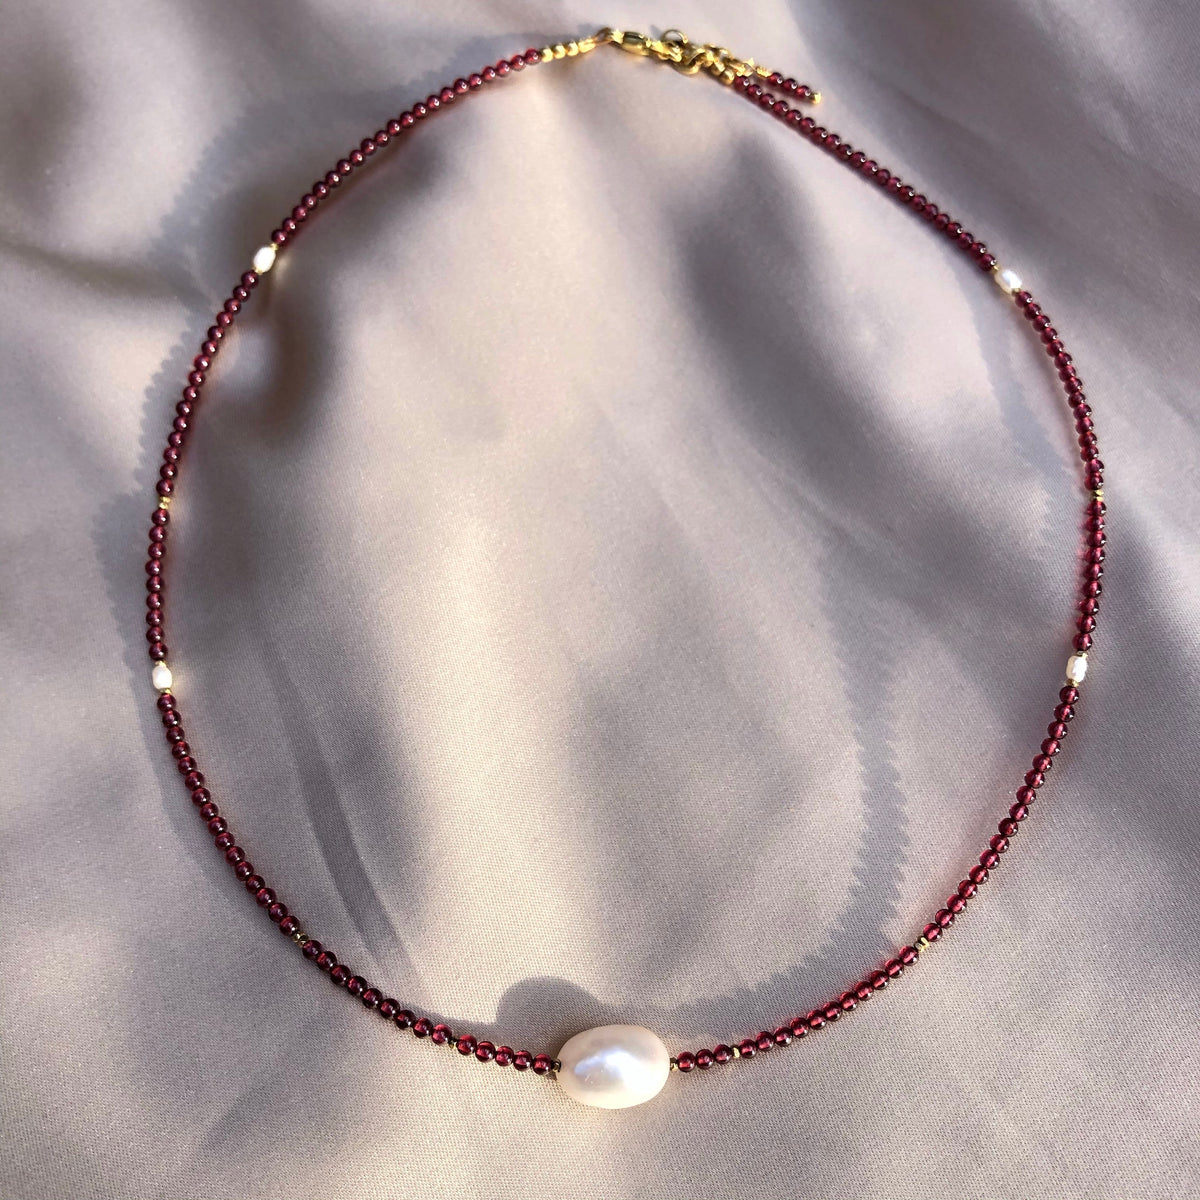 Be Unique Necklace - Bohochic beaded pearl necklace